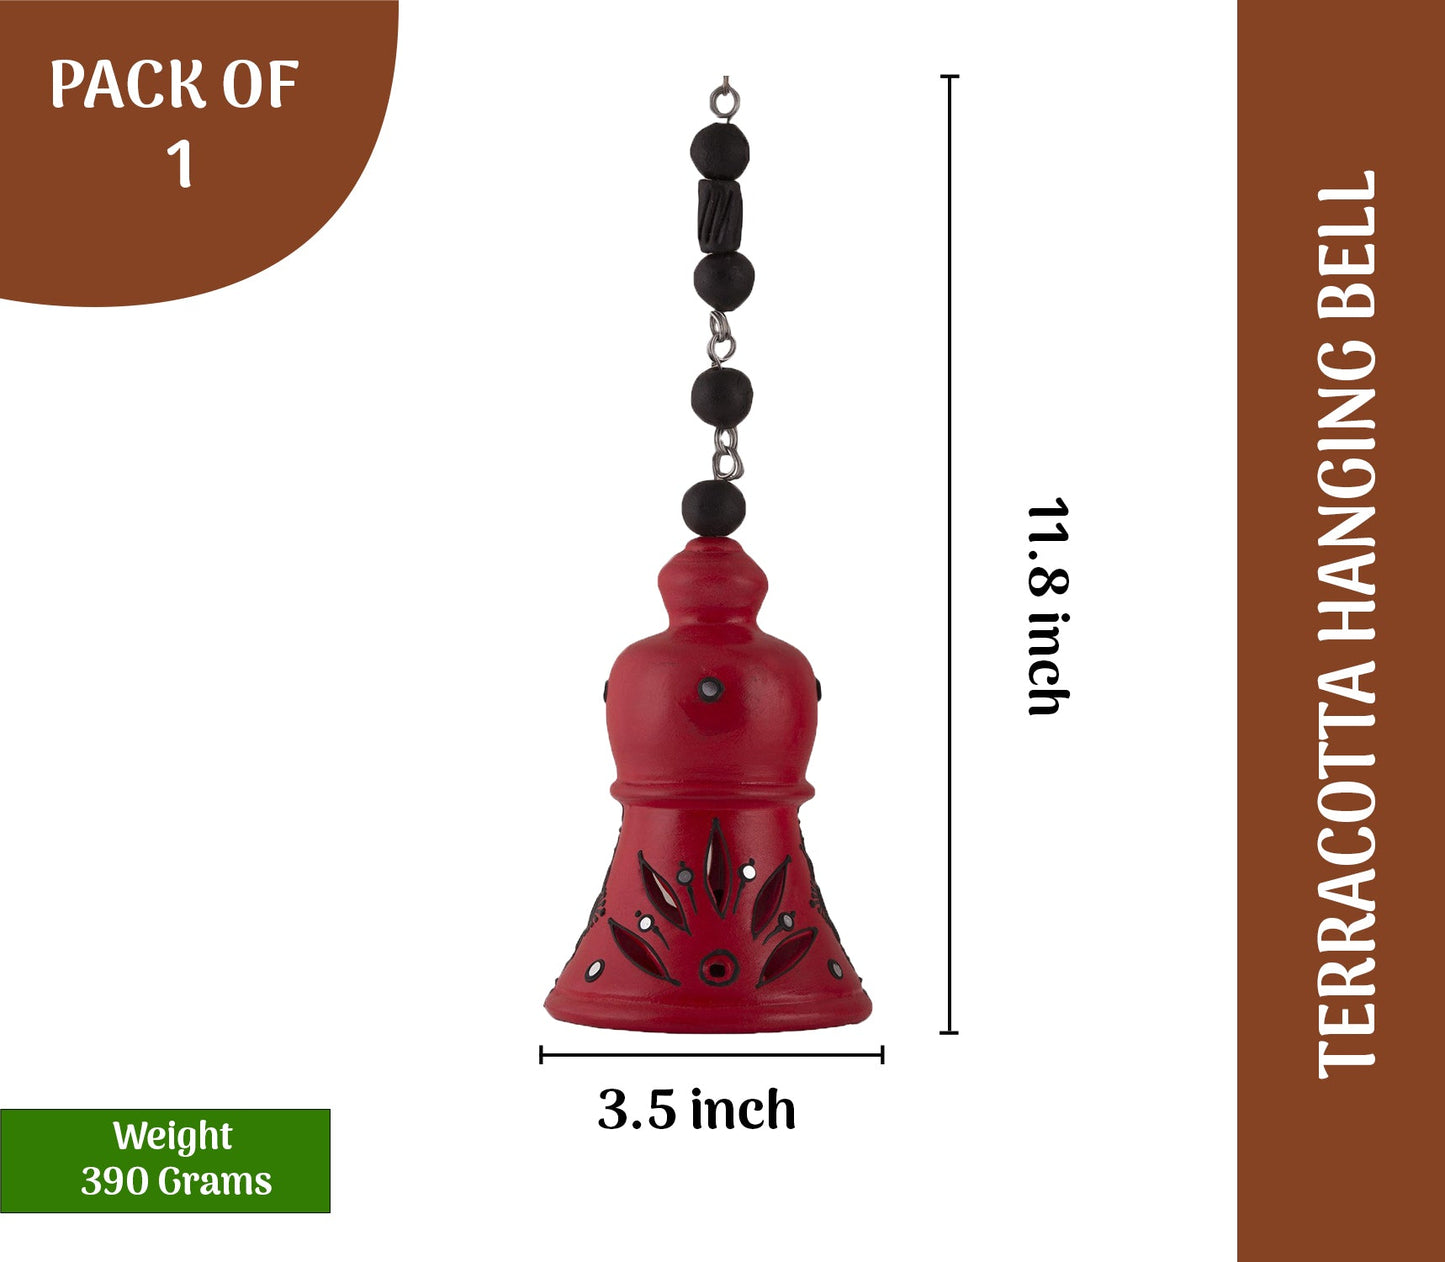 Terracotta Decorative Hanging Red Bell - 11.8 inch